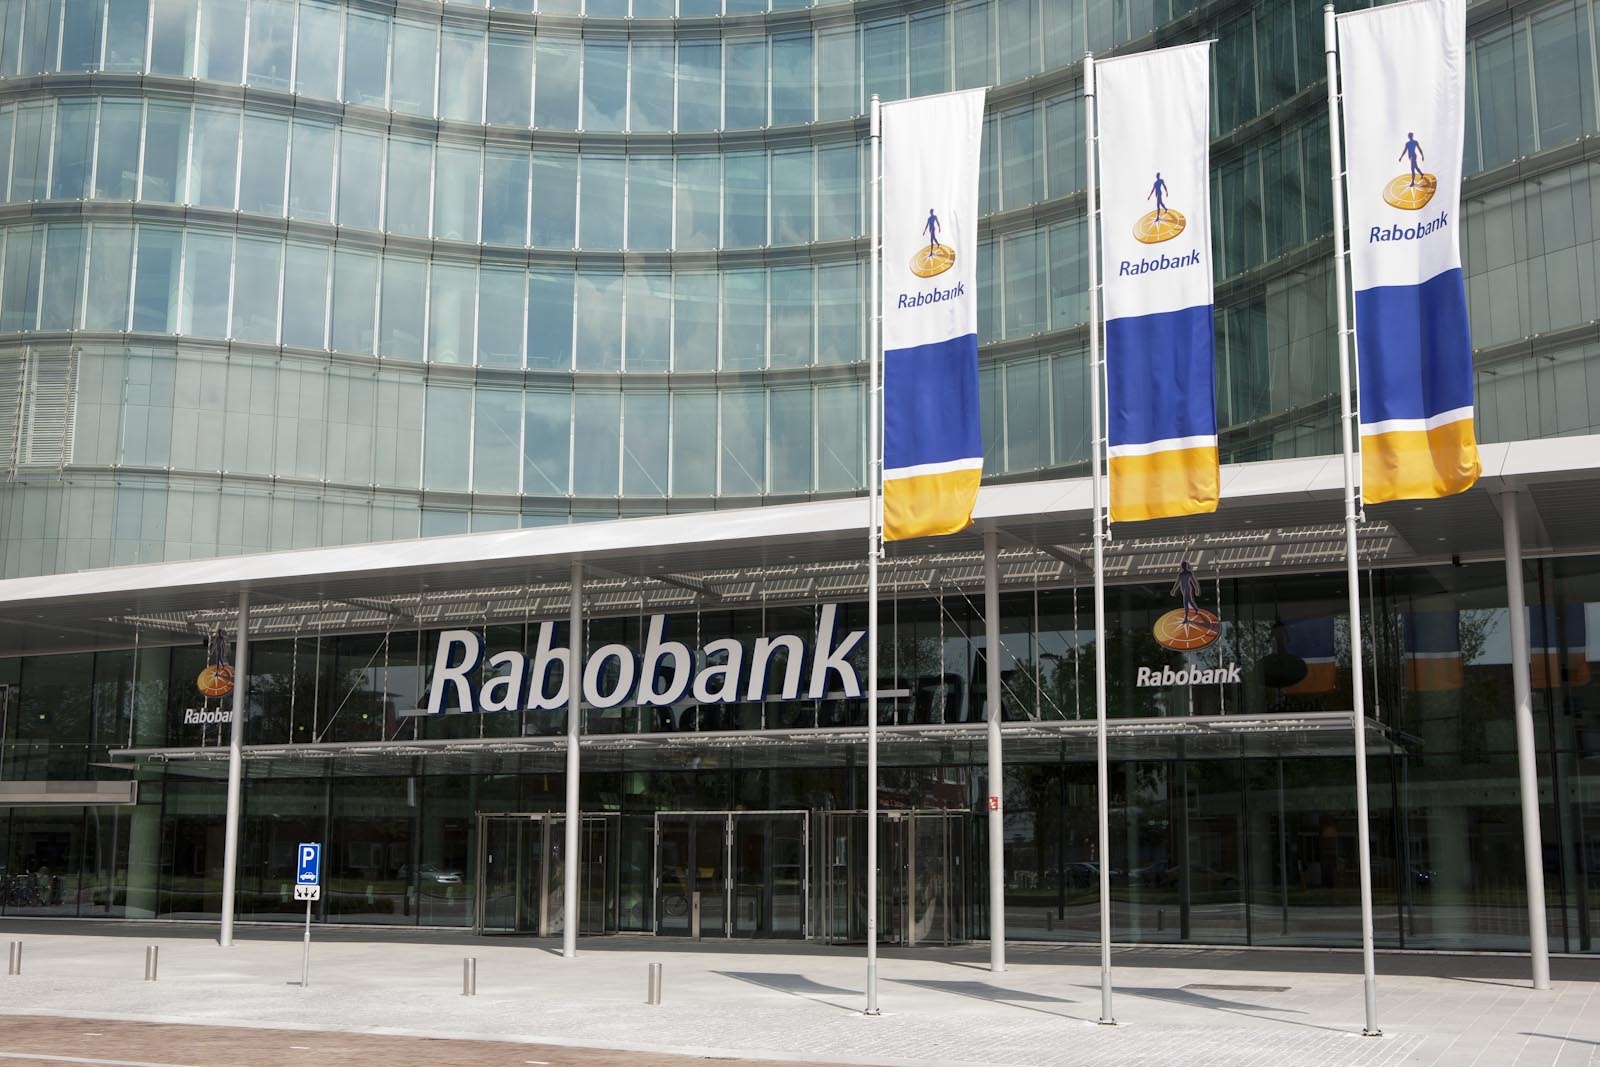 COVID-19: Dutch banking and financial group Rabobank postpones dividend payments until at least Oct 2020